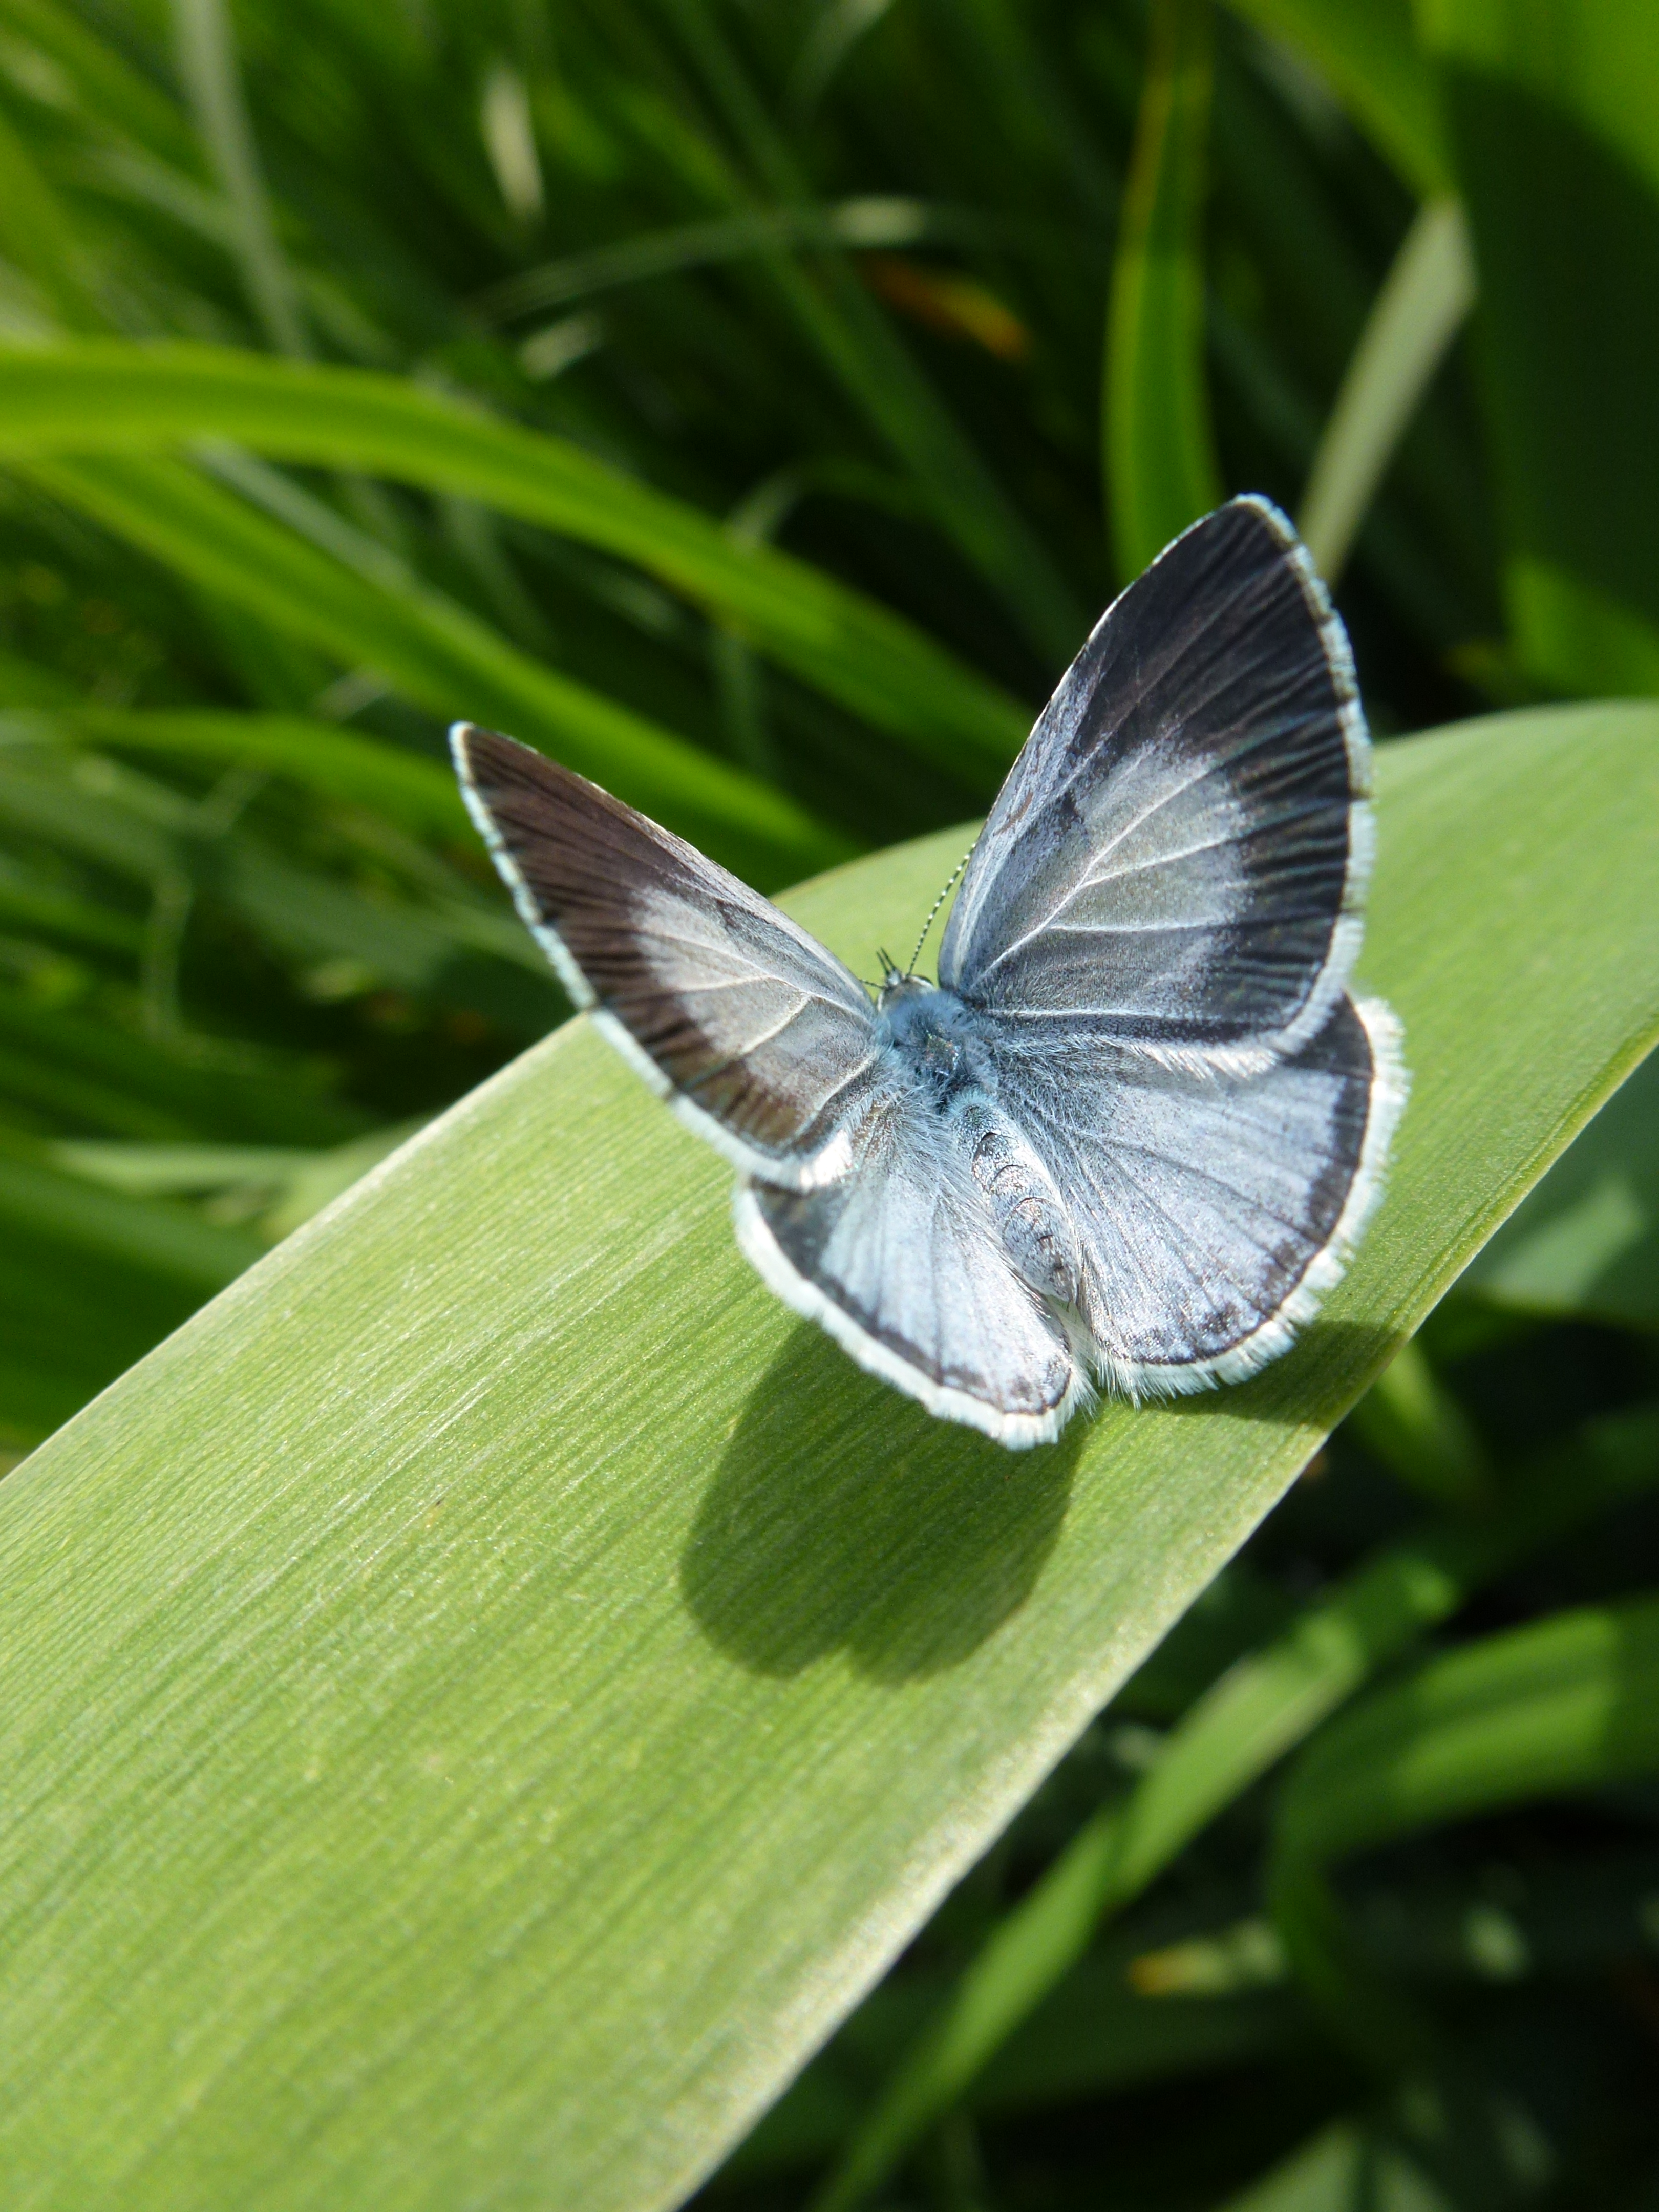 Female Holly Blue Butterfly on Campus 2 by SrTw on DeviantArt